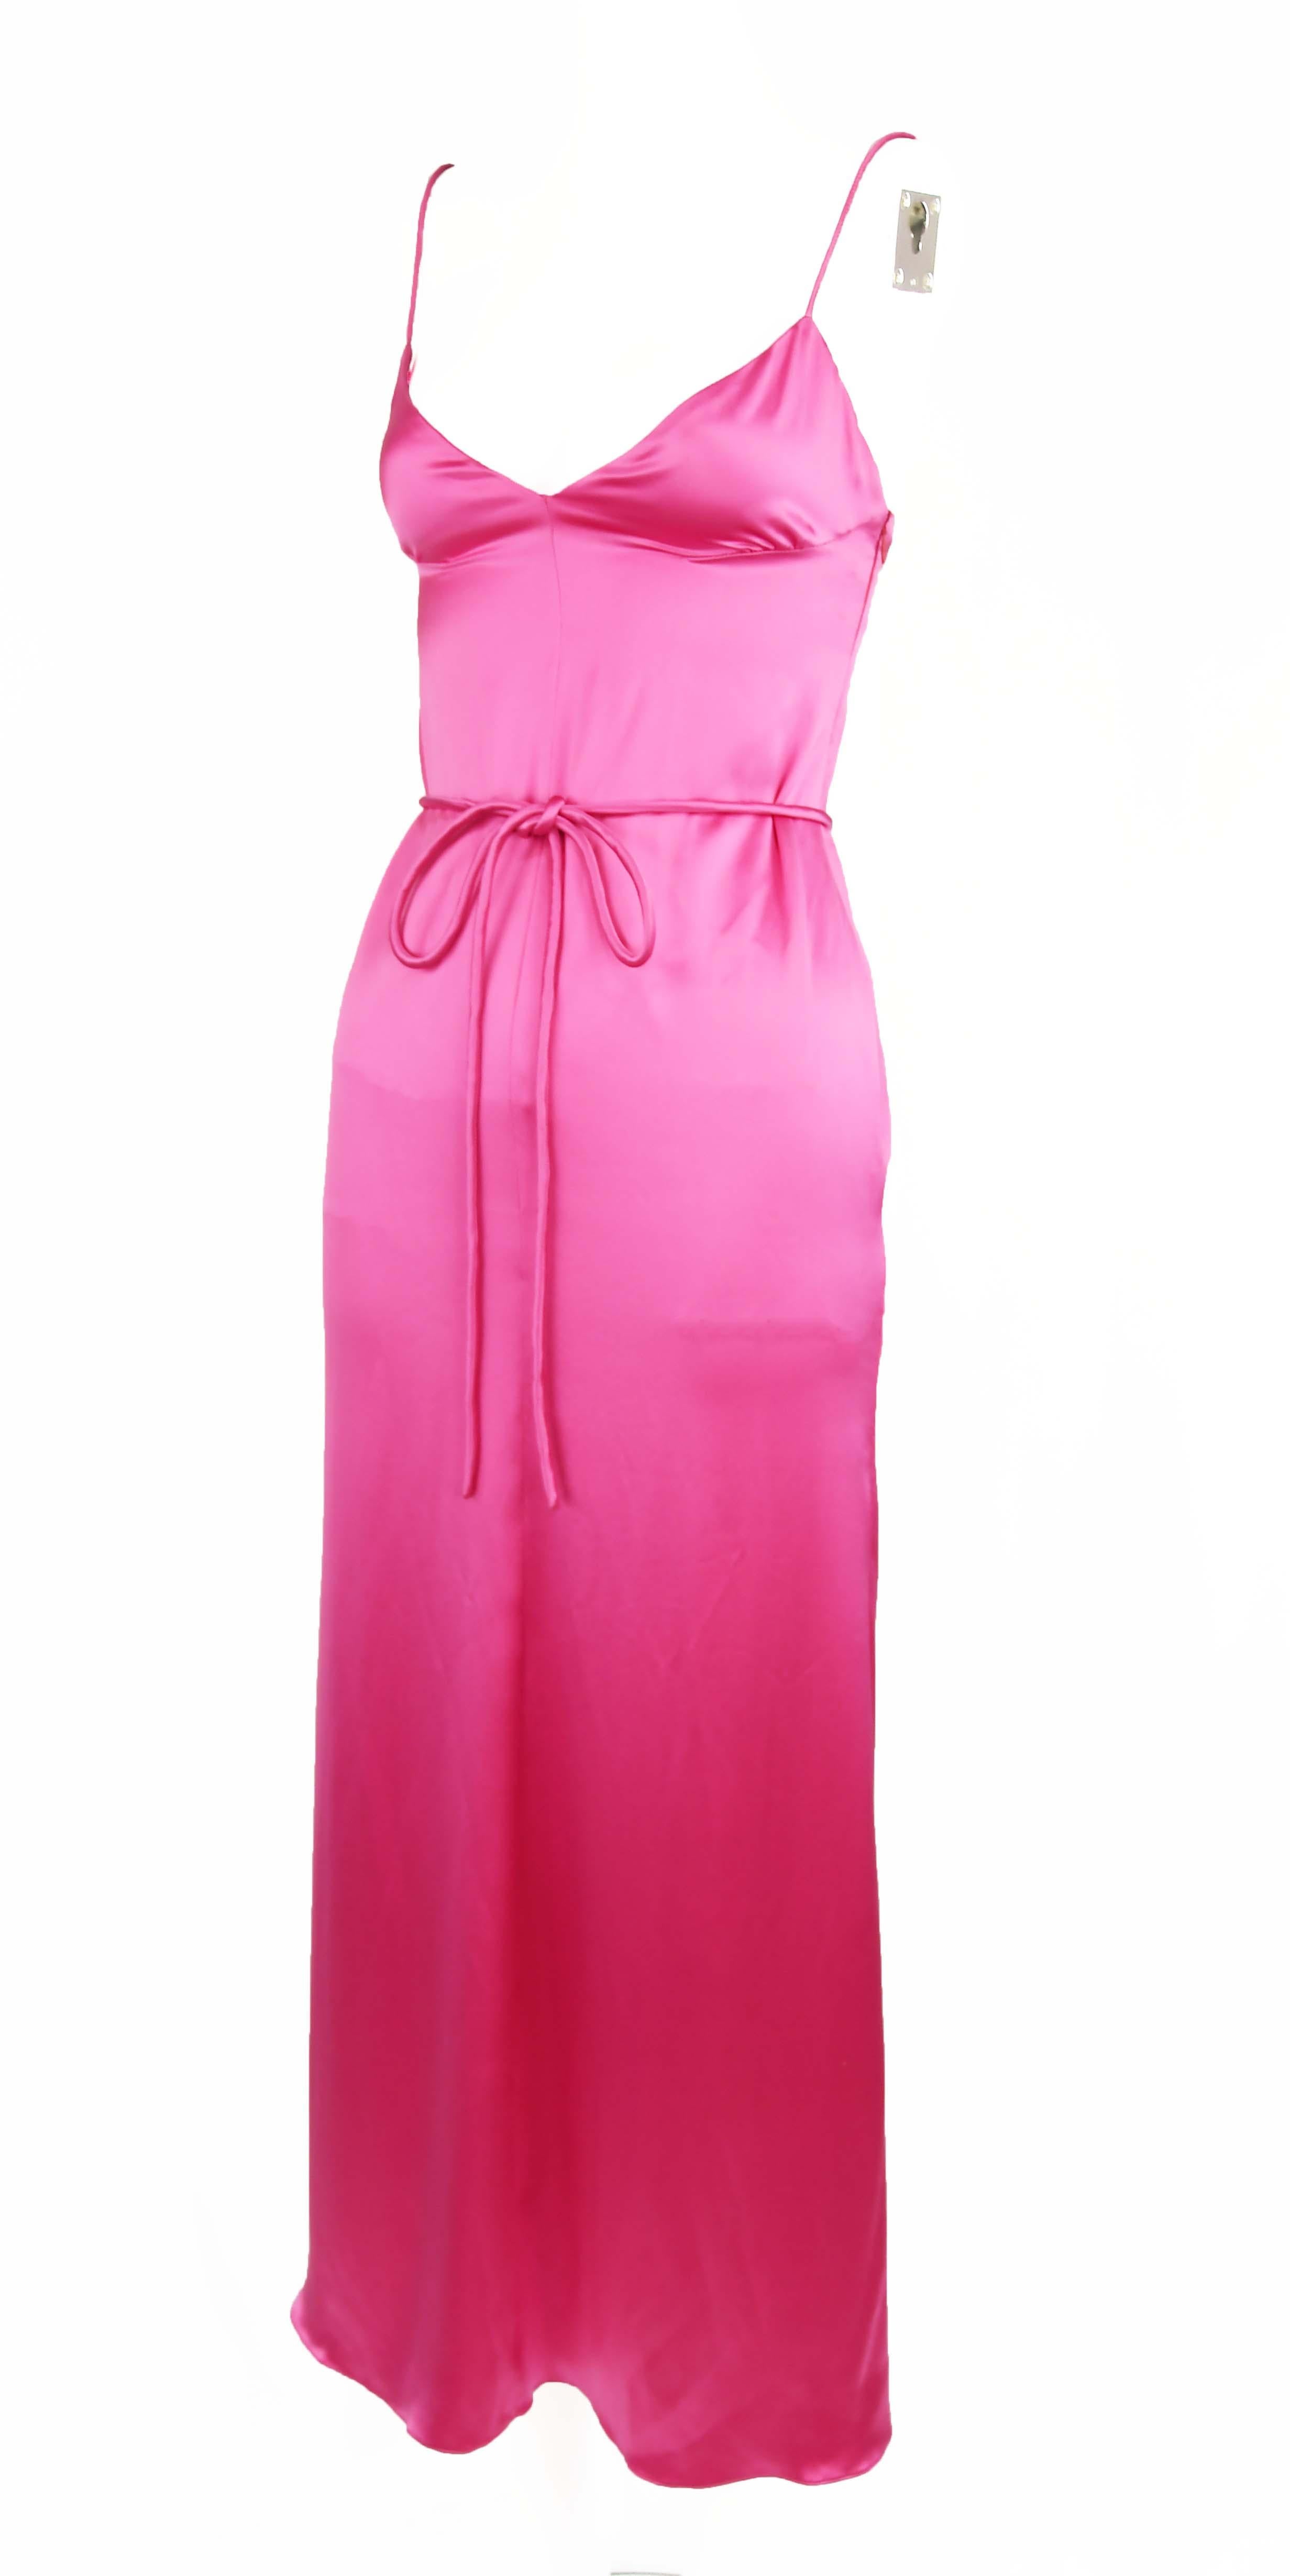 Simple, elegant and stunning, this Valentino pink silk gown is picturesque.  Made of silk charmeuse and features spaghetti straps and tie at the waist.  A Valentino classic.

Size: 4

Condition: Excellent vintage condition

Composition: 100%